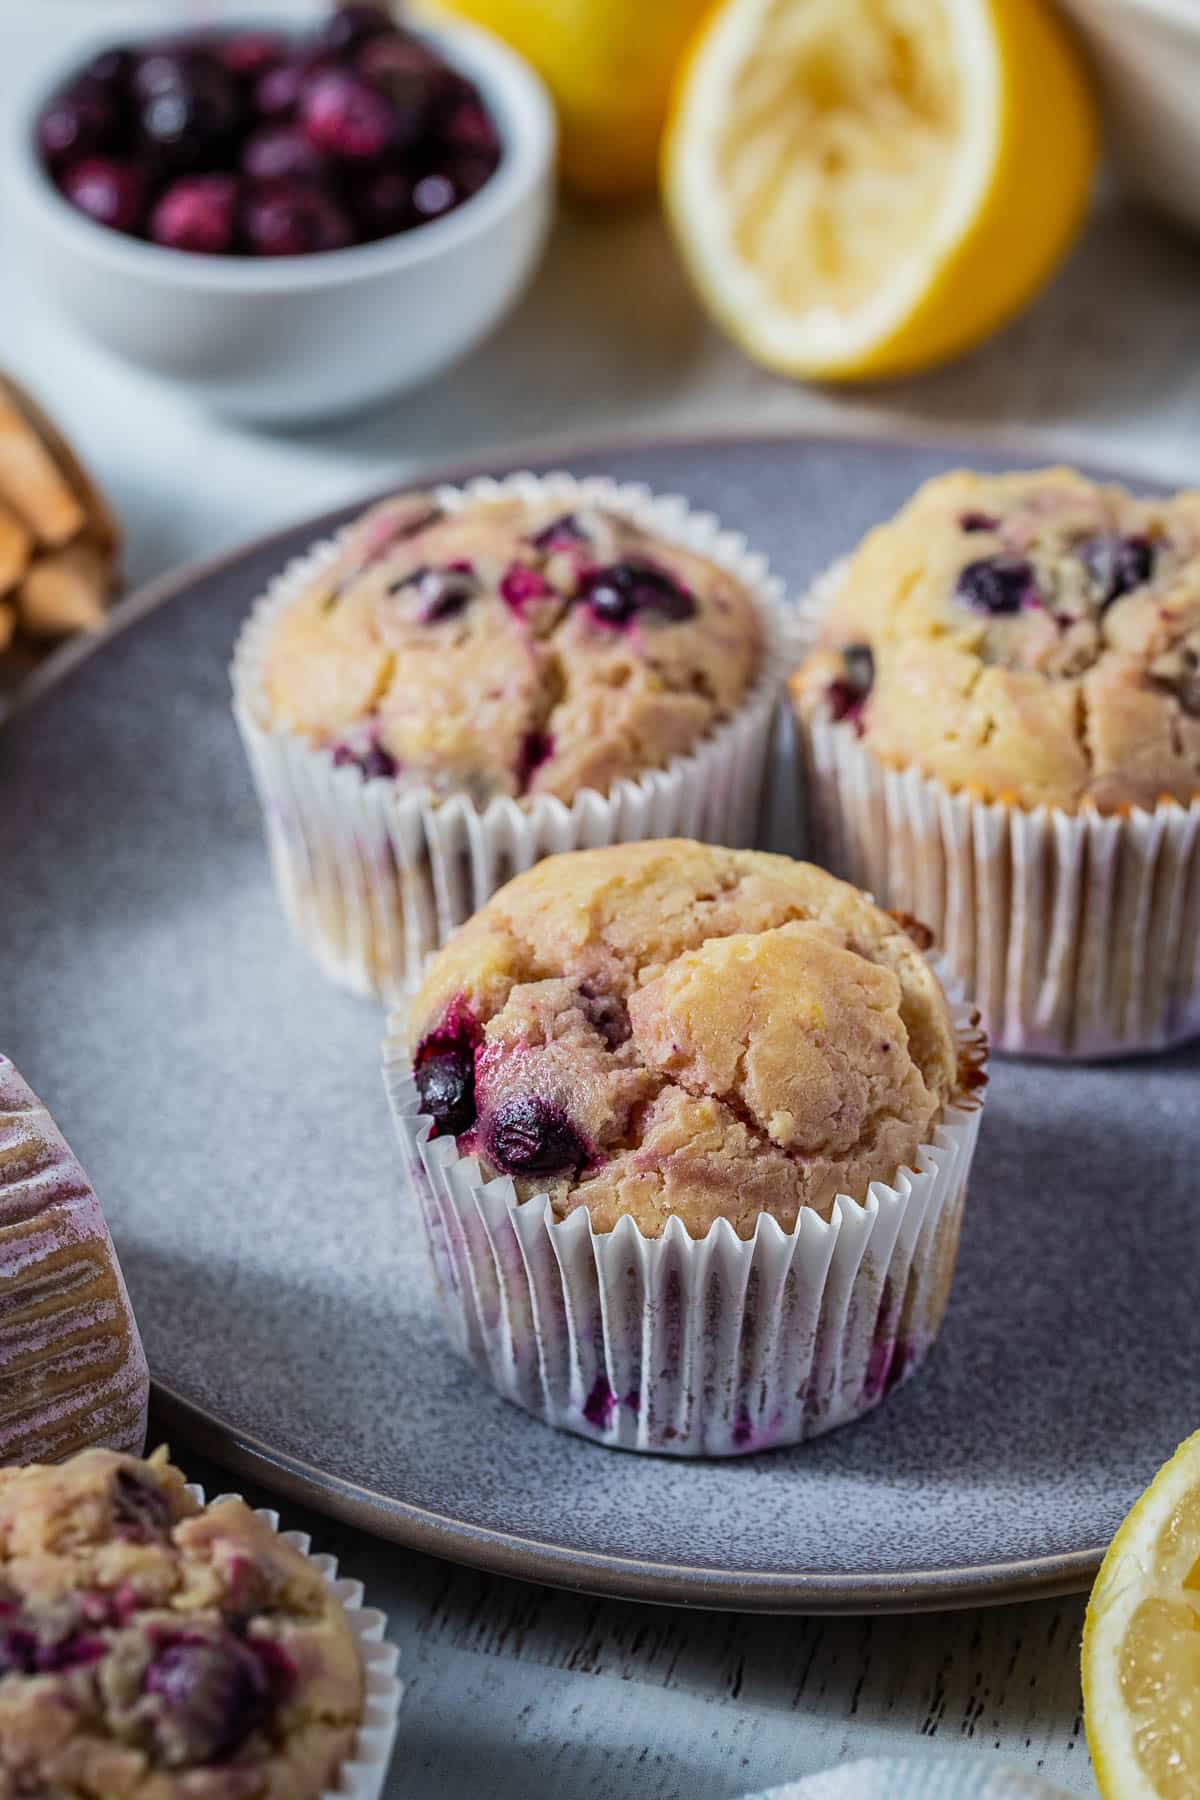 finished muffins on a plate with lemons and blueberries